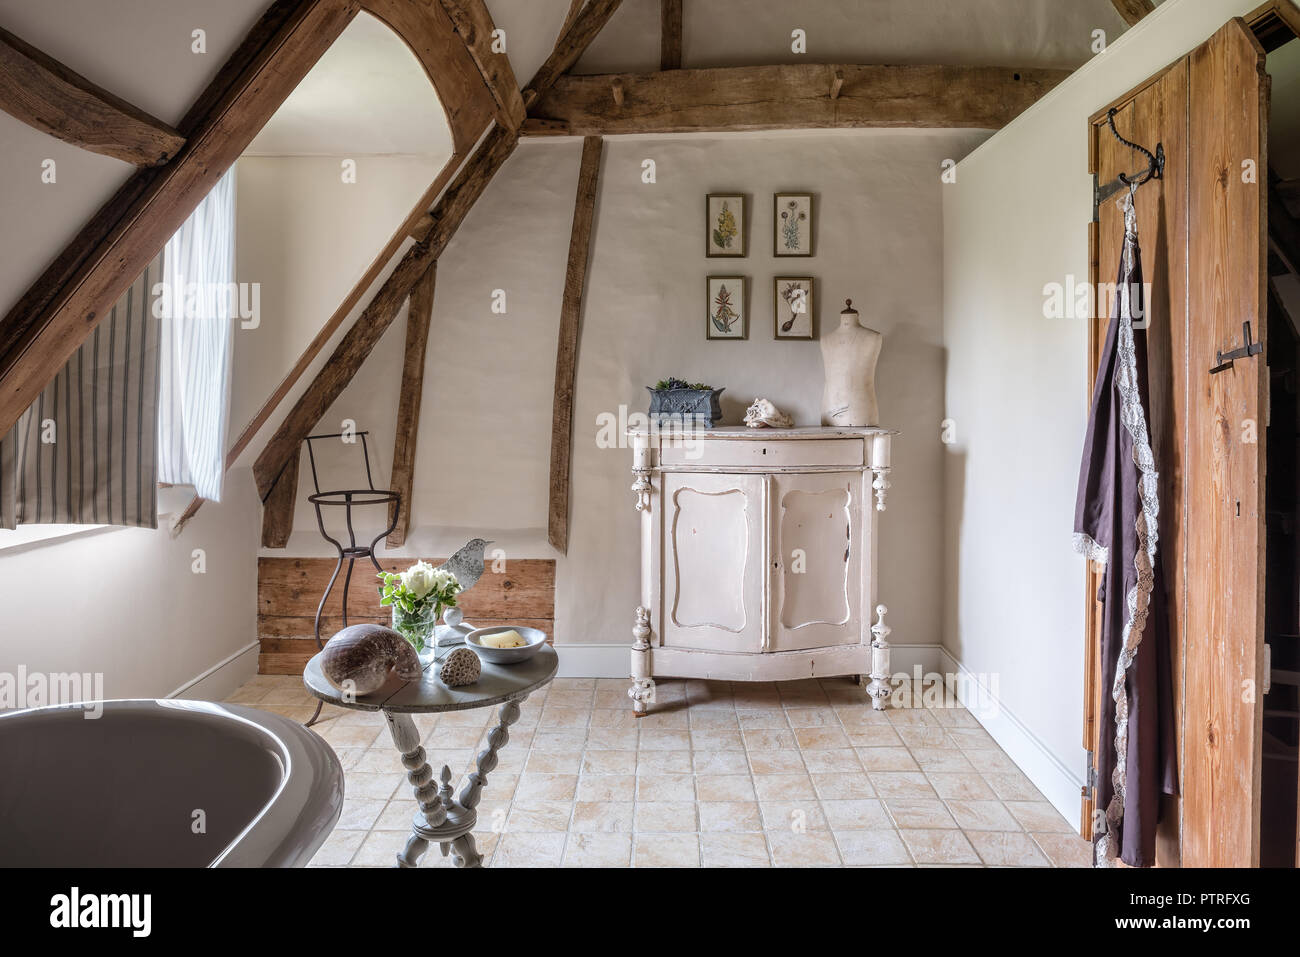 Mannequin on sideboard with botanical prints in restored 16th century farmhouse bathroom Stock Photo